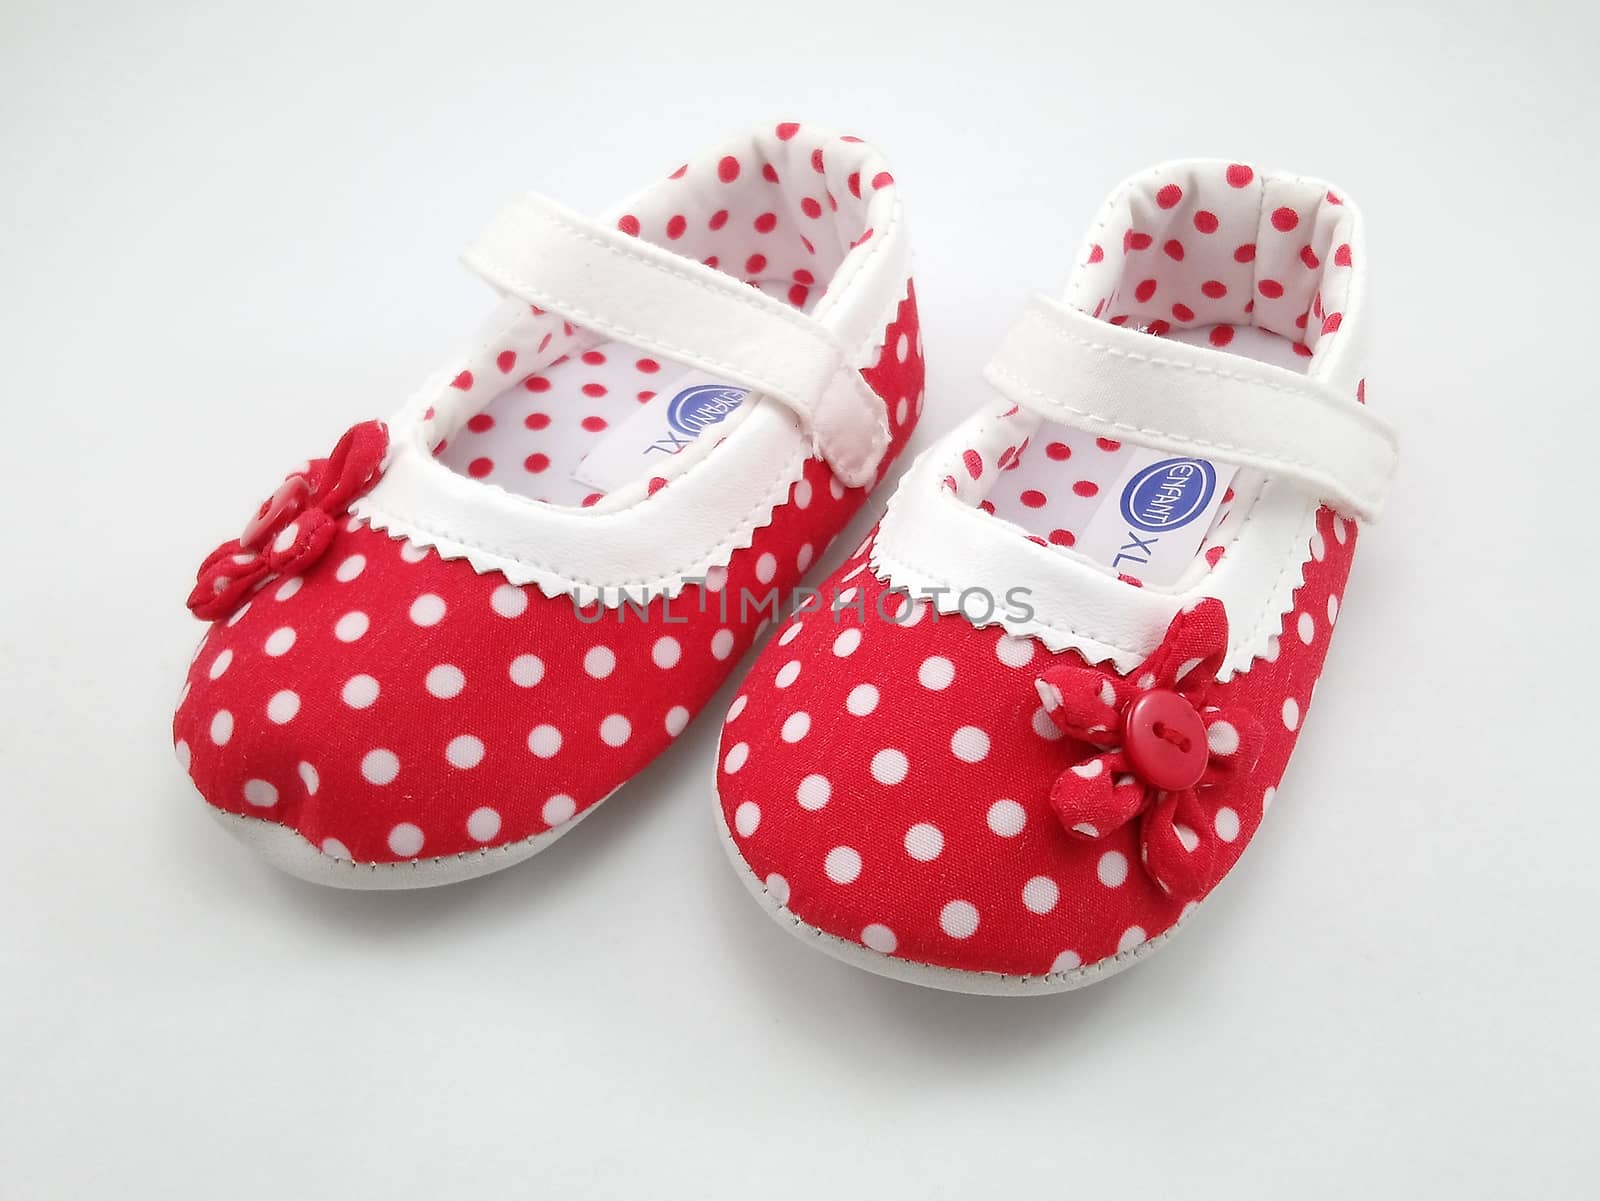 MANILA, PH - SEPT 24 - Enfant red polka dots baby shoes on September 24, 2020 in Manila, Philippines.